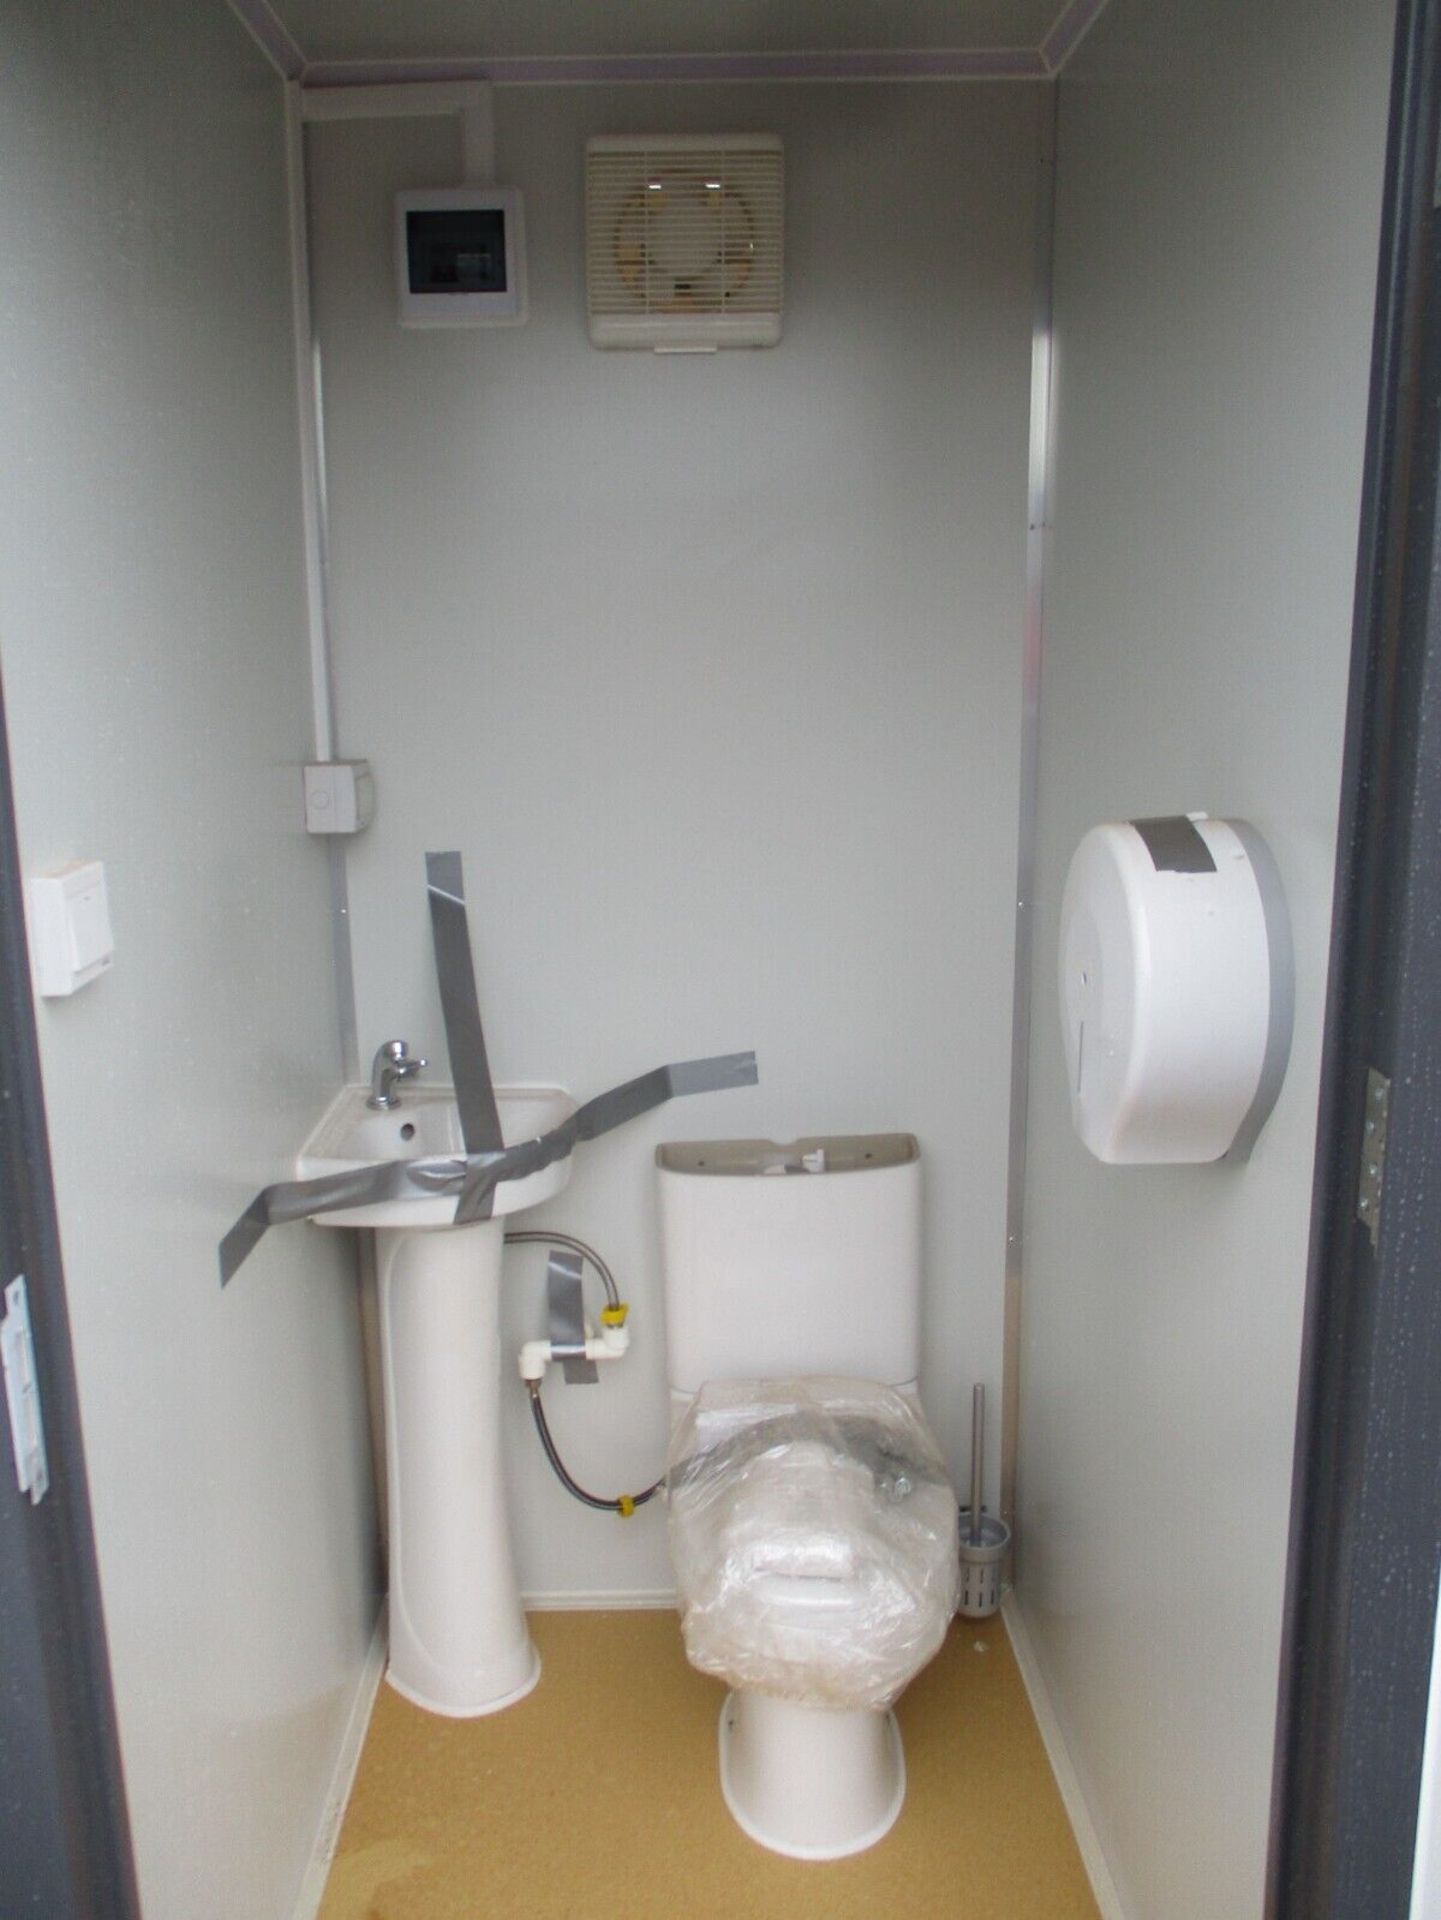 1.1M X 1.3M SHIPPING CONTAINER TOILET BLOCK - Image 5 of 5